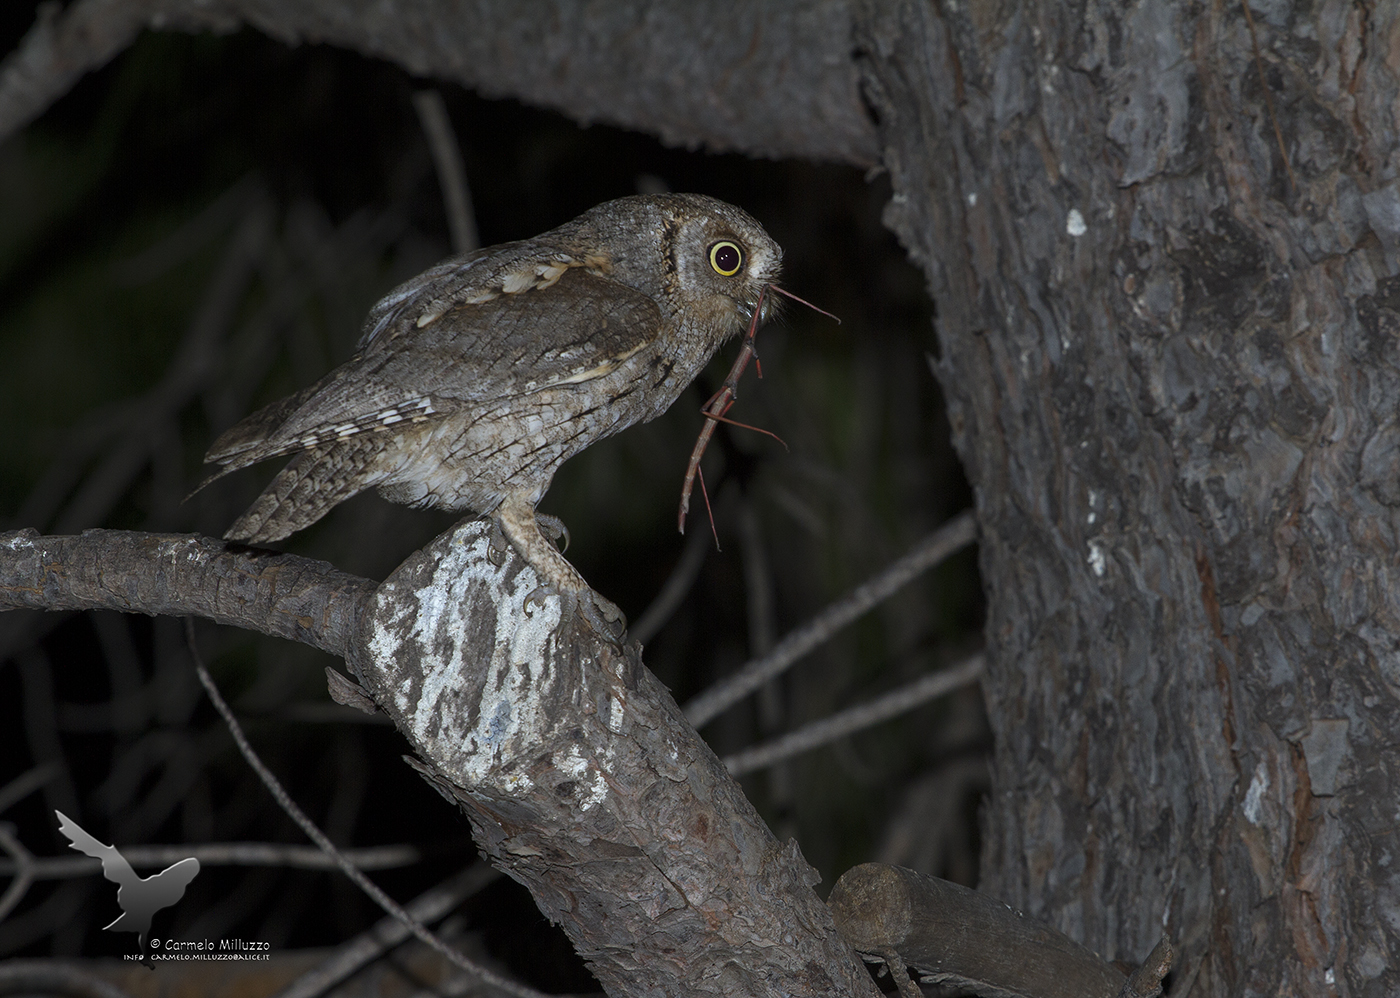 The owl and the stick bug...